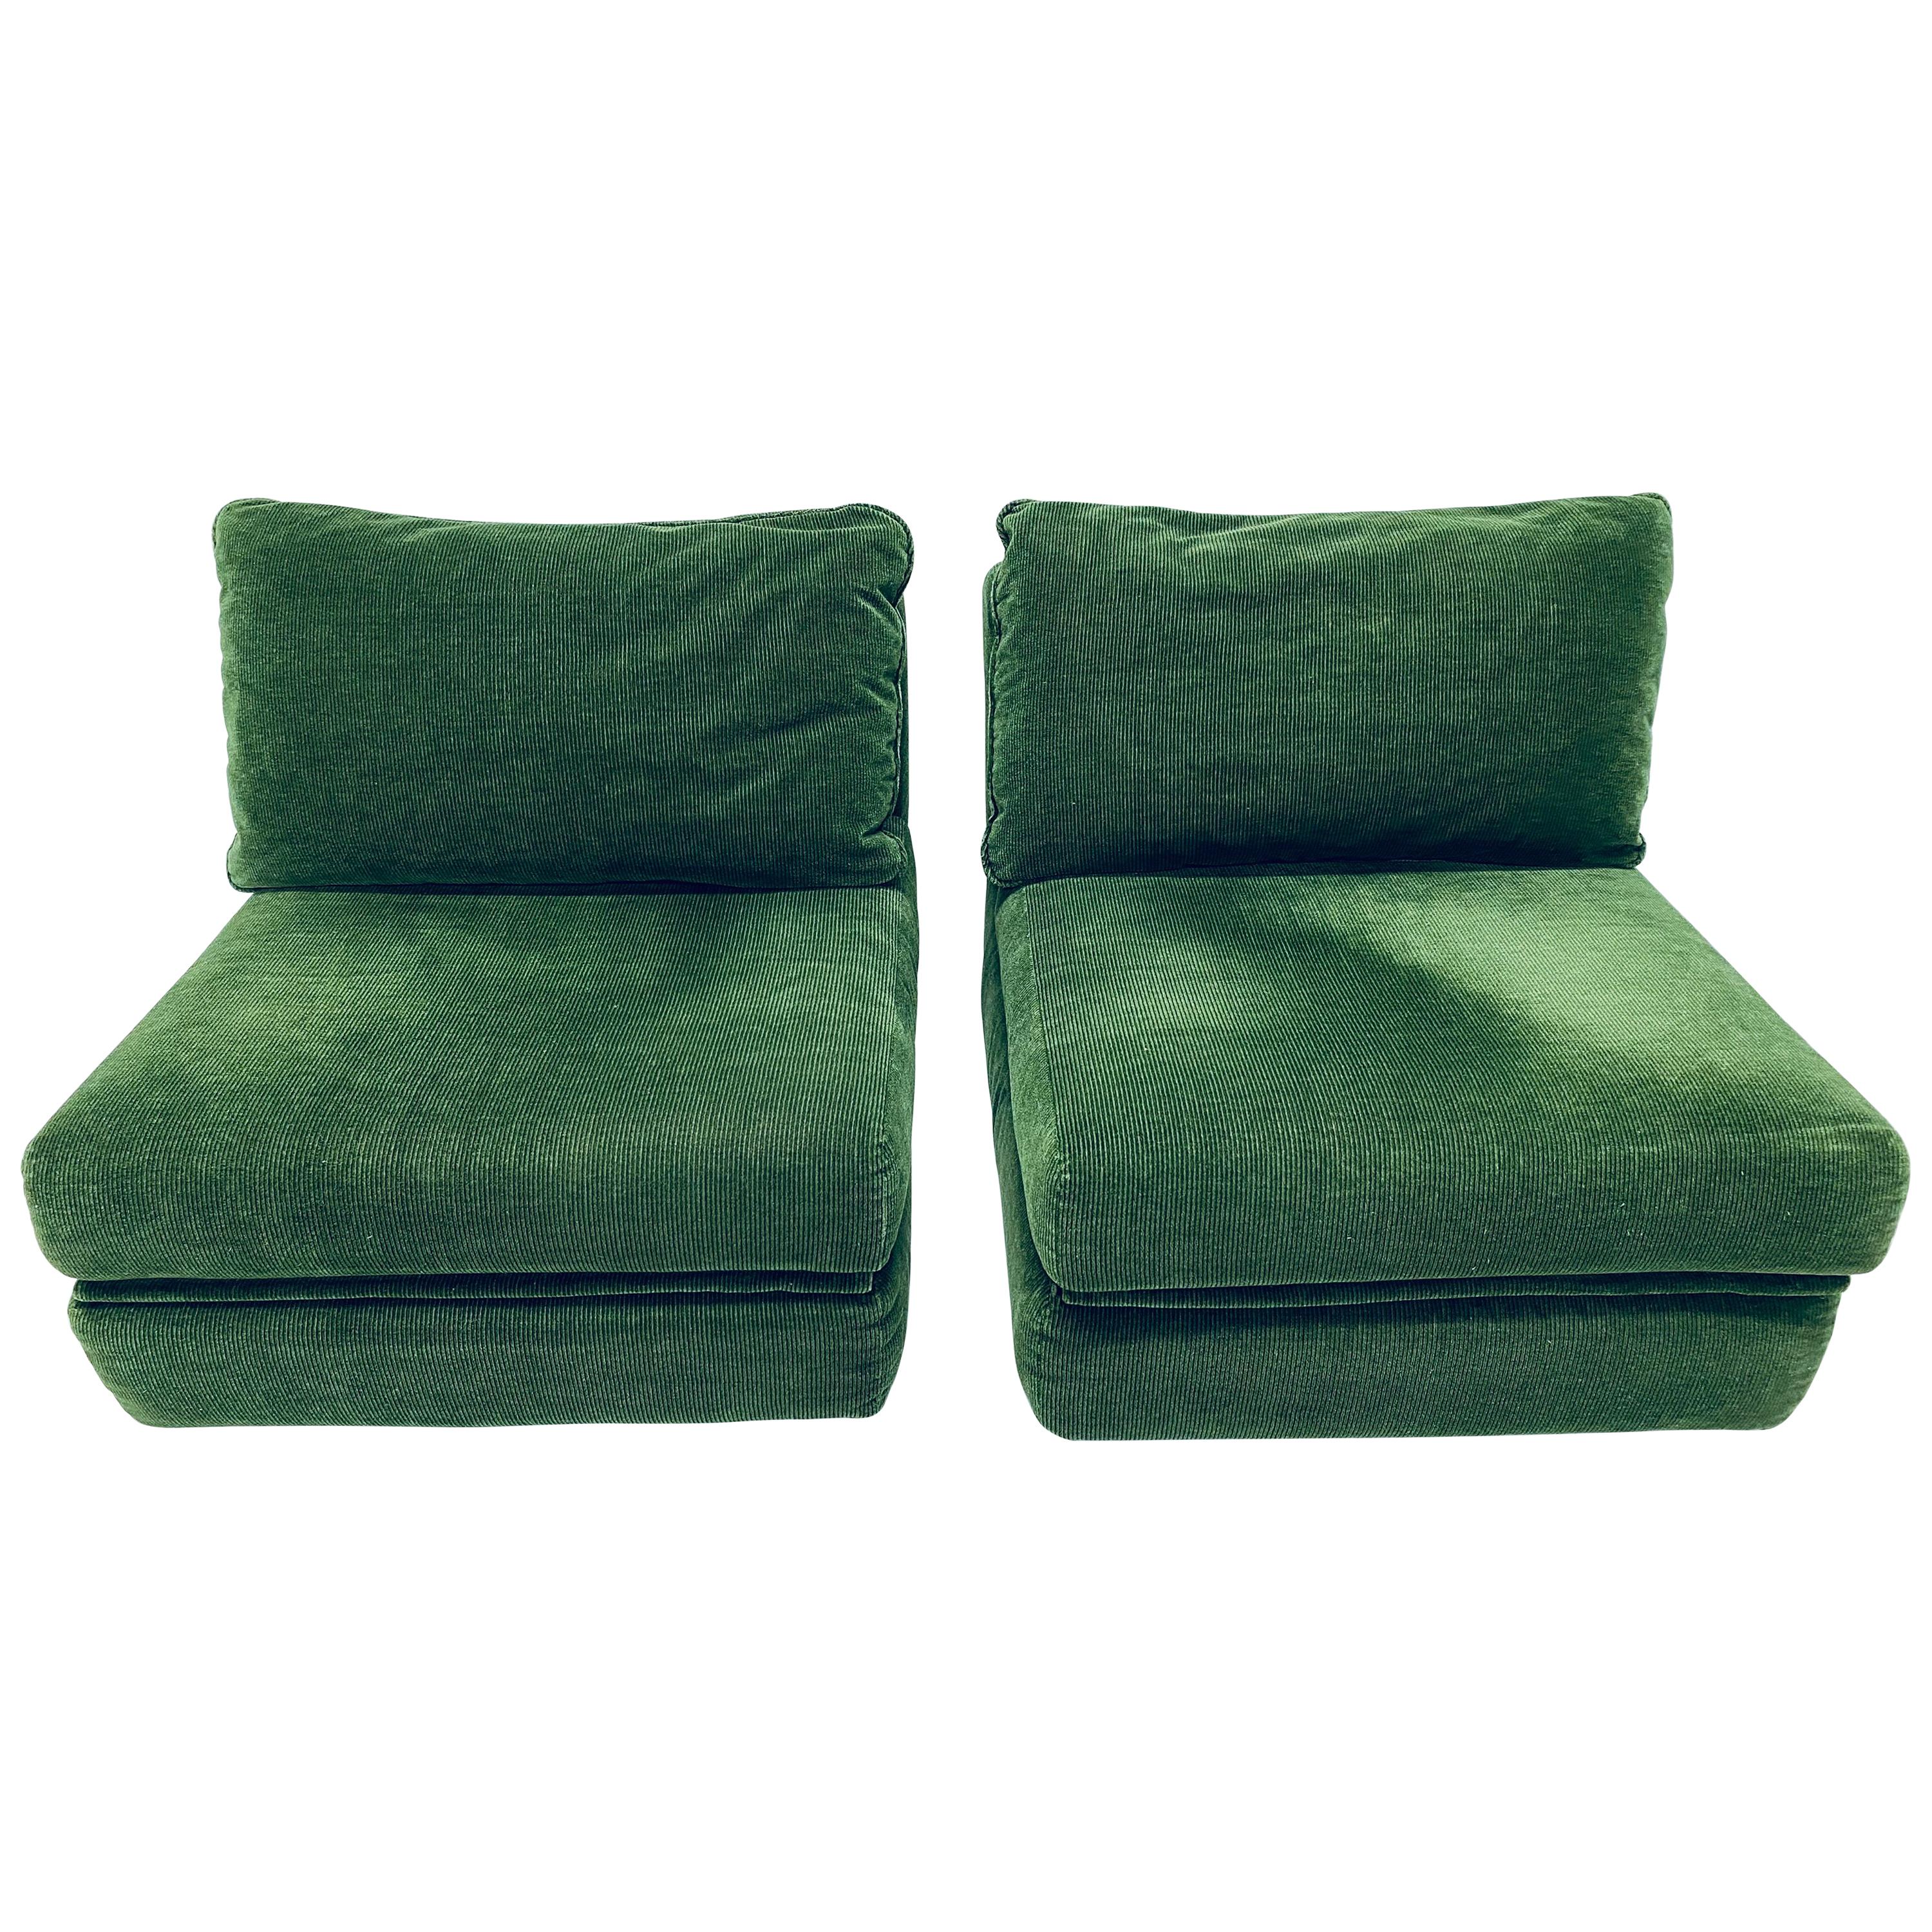 Pair of Midcentury Green Corduroy Upholstered Convertible Lounge Chair Daybeds